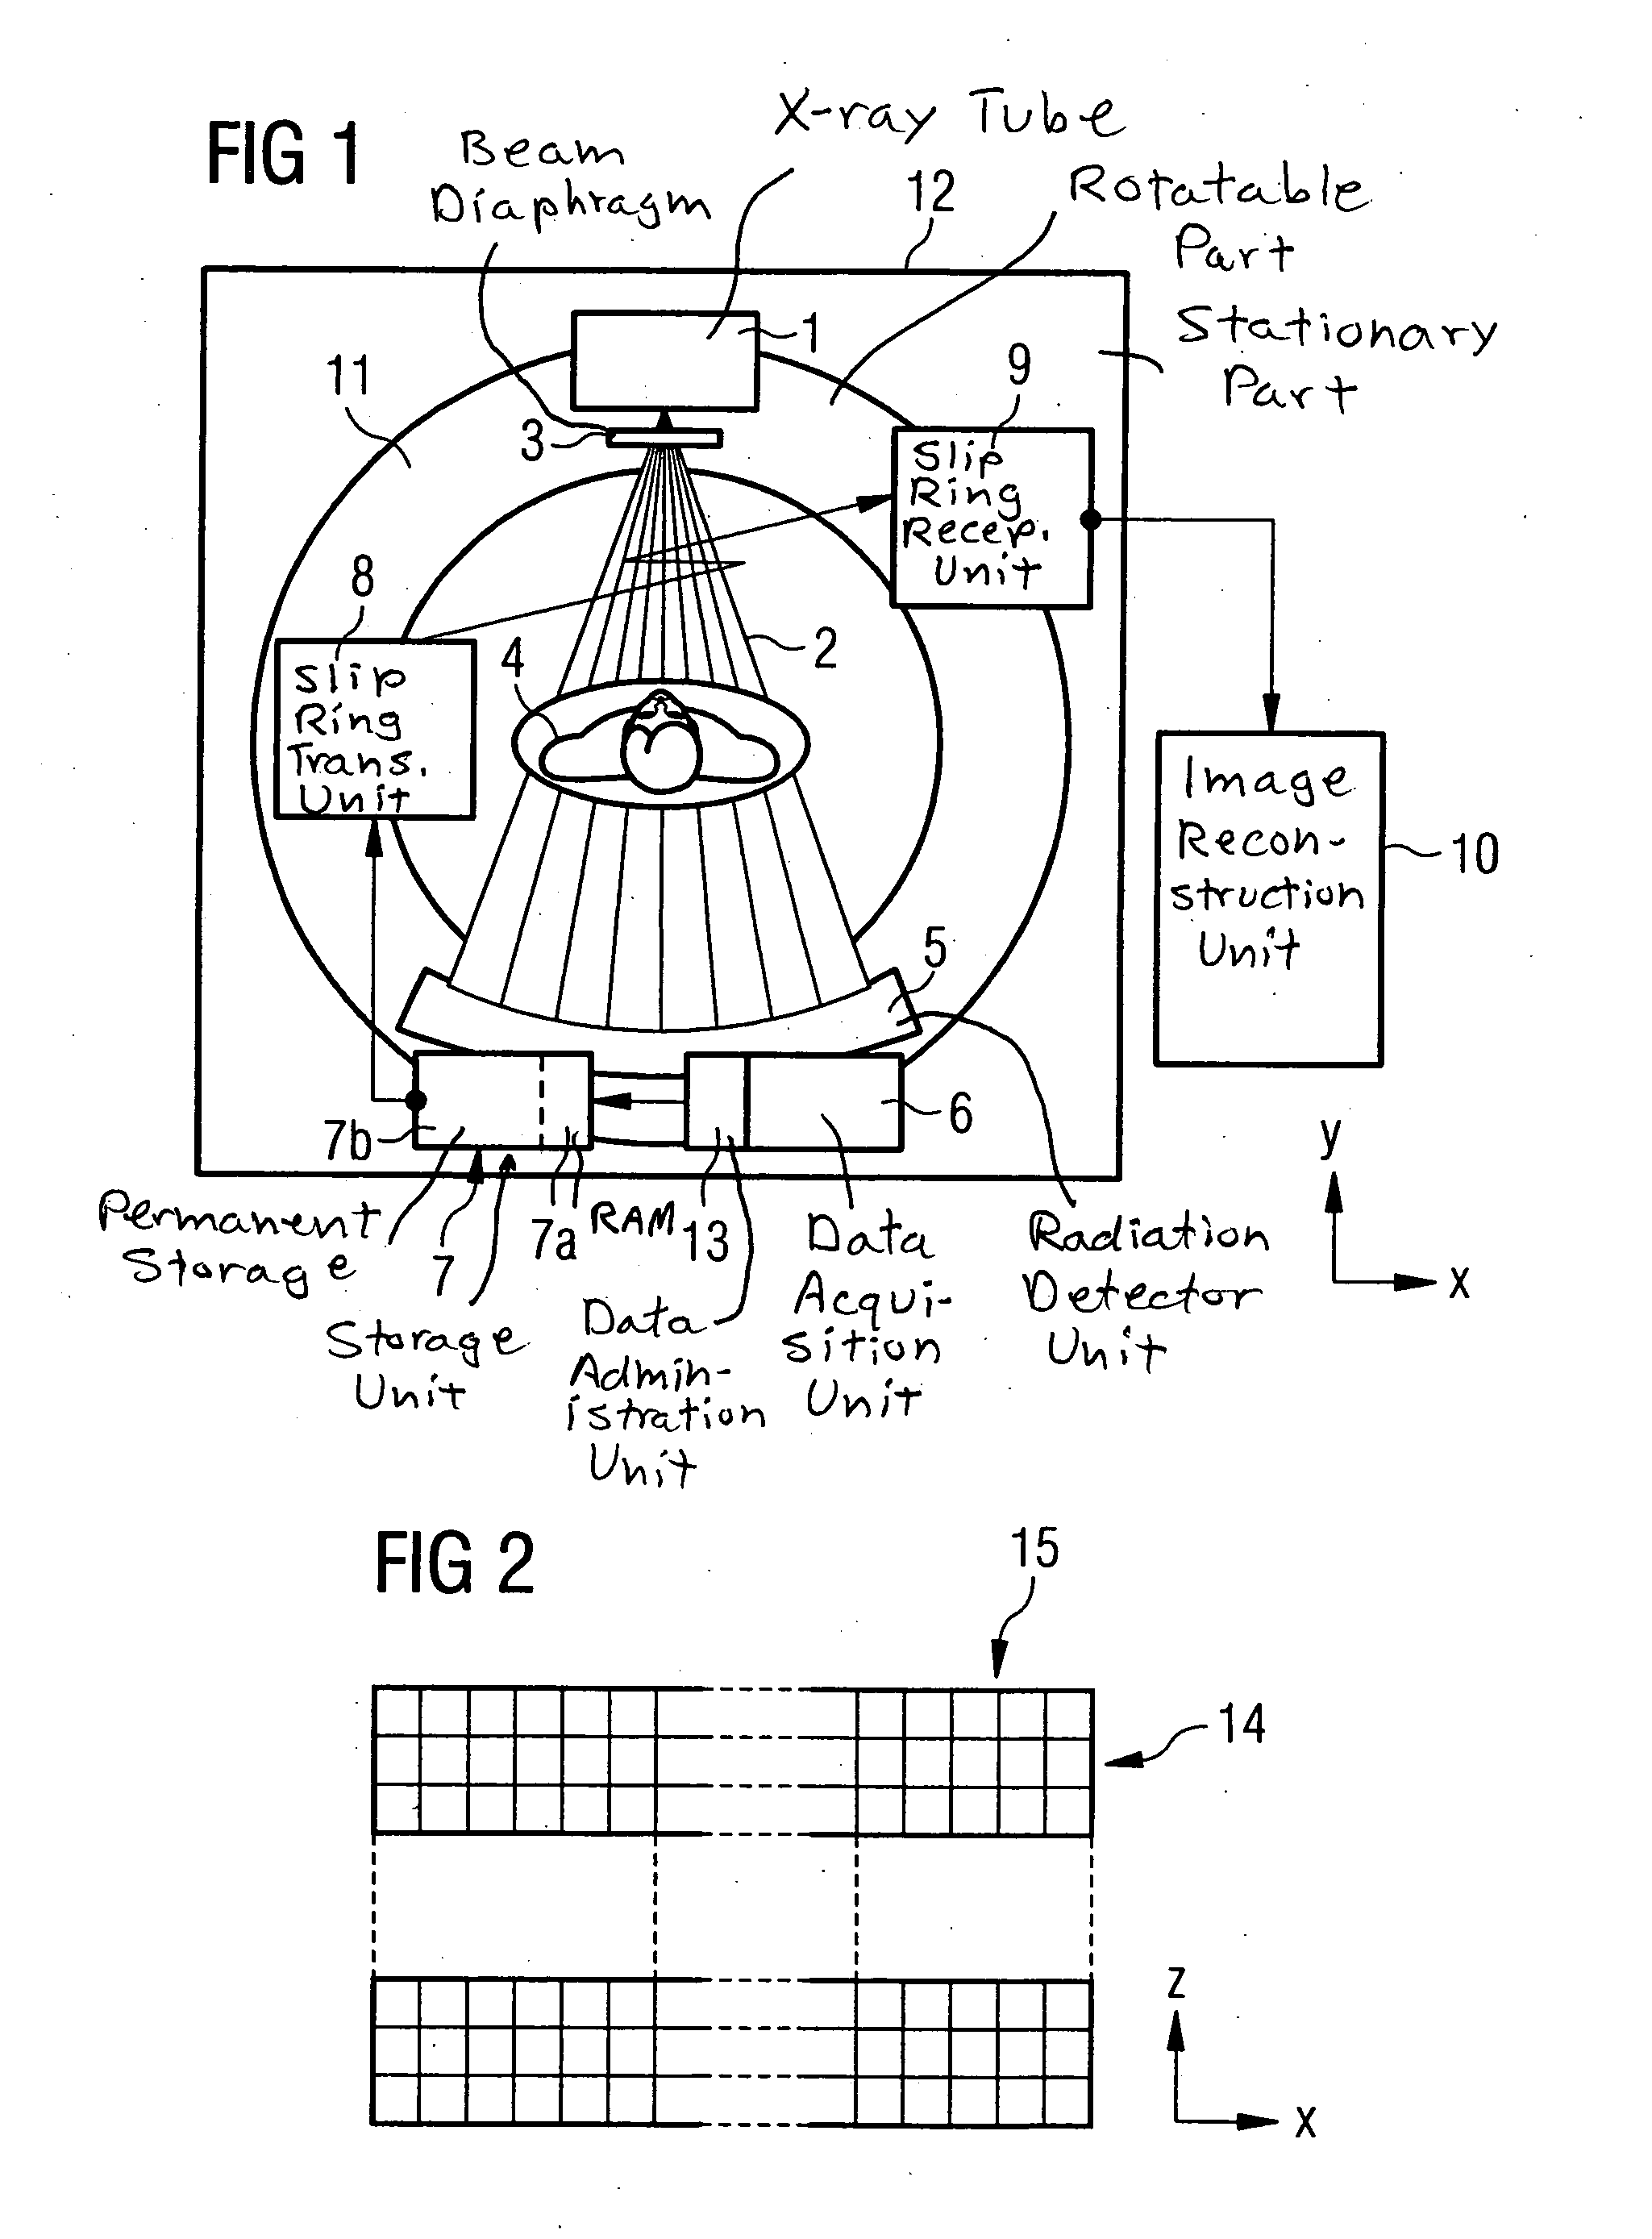 Multi-slice computer tomography system with data transfer system with reduced transfer bandwidth